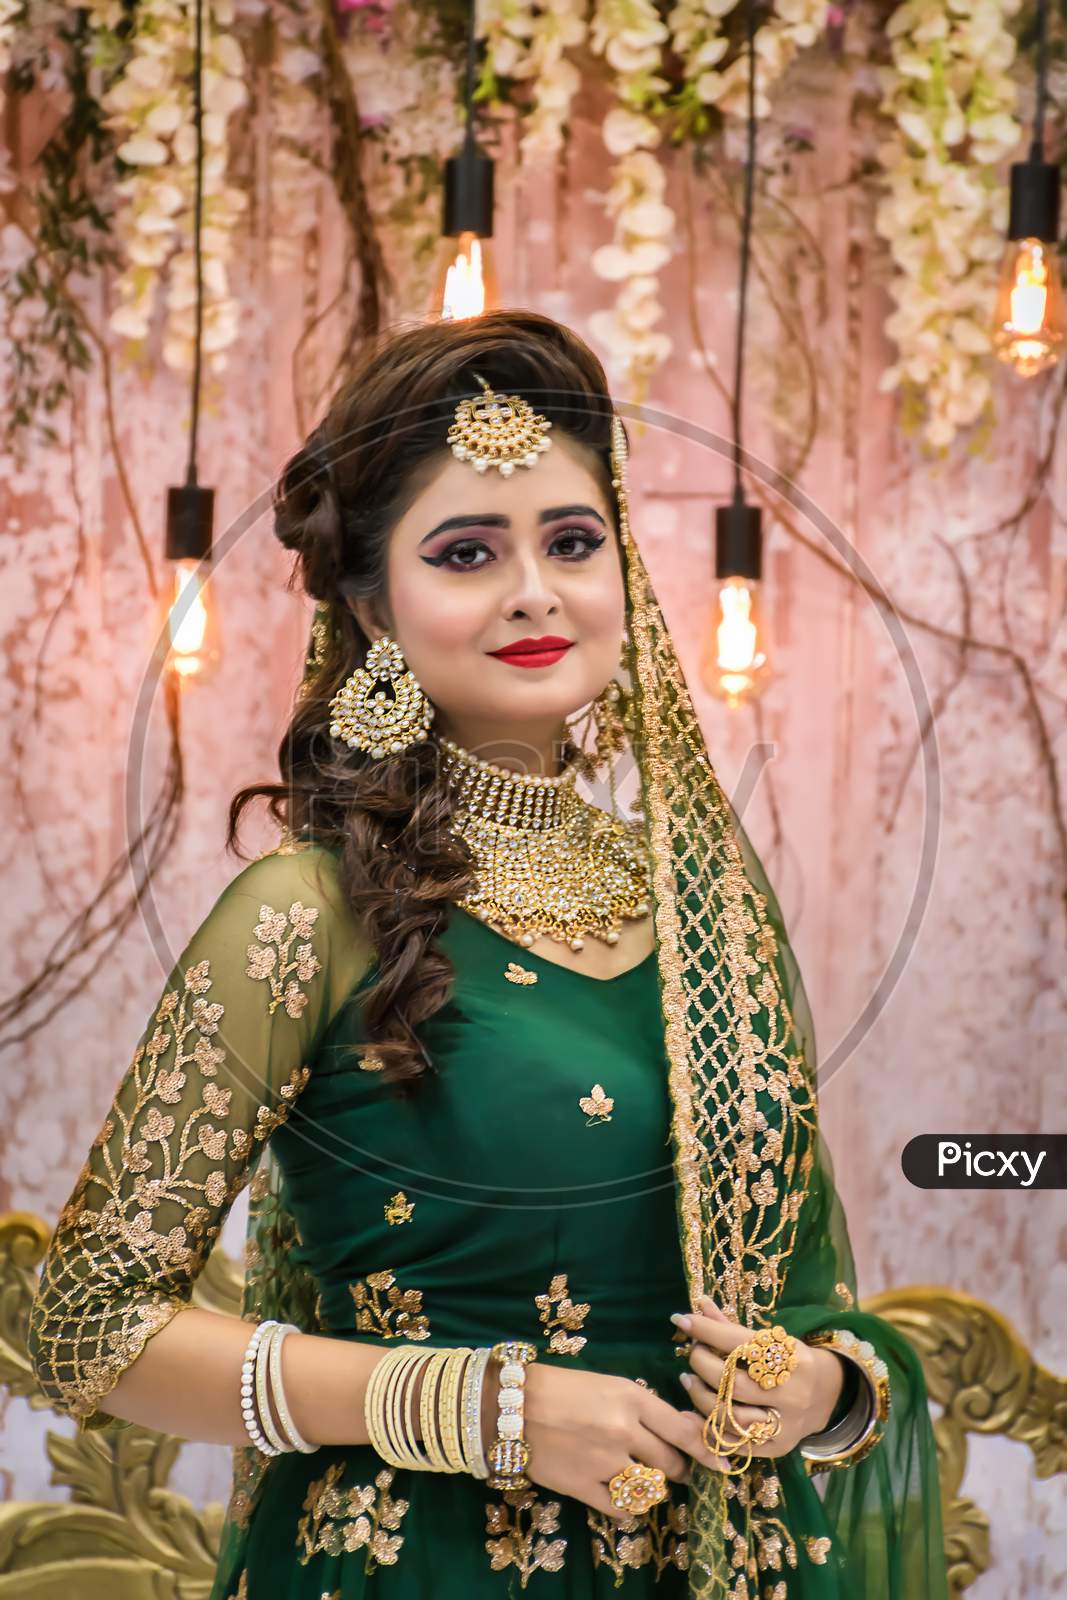 Portrait Of An Indian Bride Standing With Glamorous Outfit And Jewellery With Makeup In A Banquet Hall. Traditional Indian Bride In Wedding In Kolkata, India On January 2020